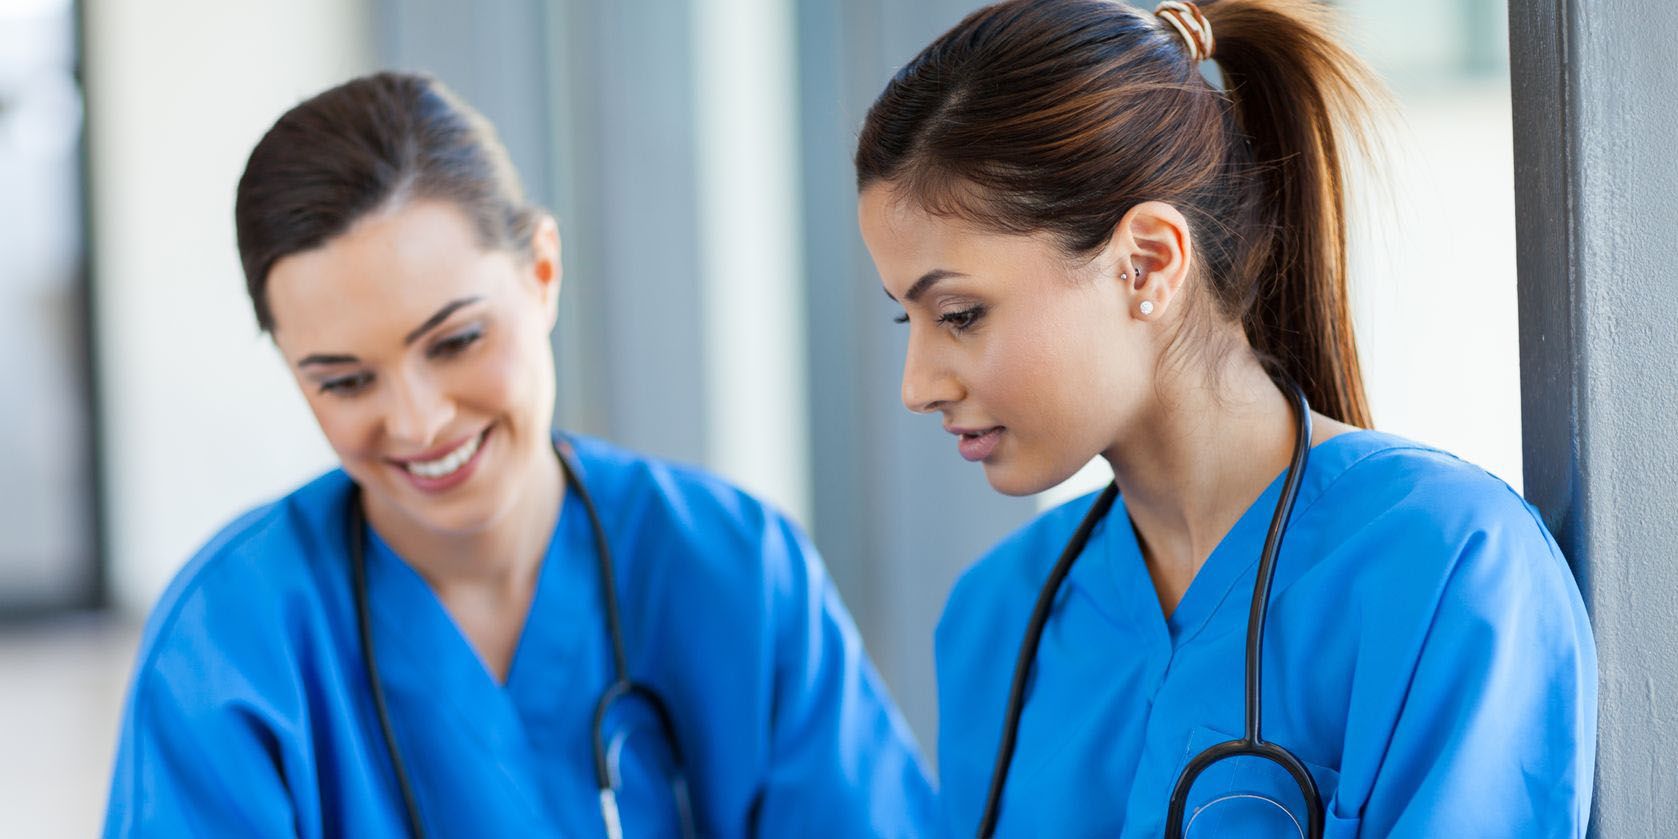 Medical Assistants | 9 Top Allied Health Careers with the Ultimate Job Security